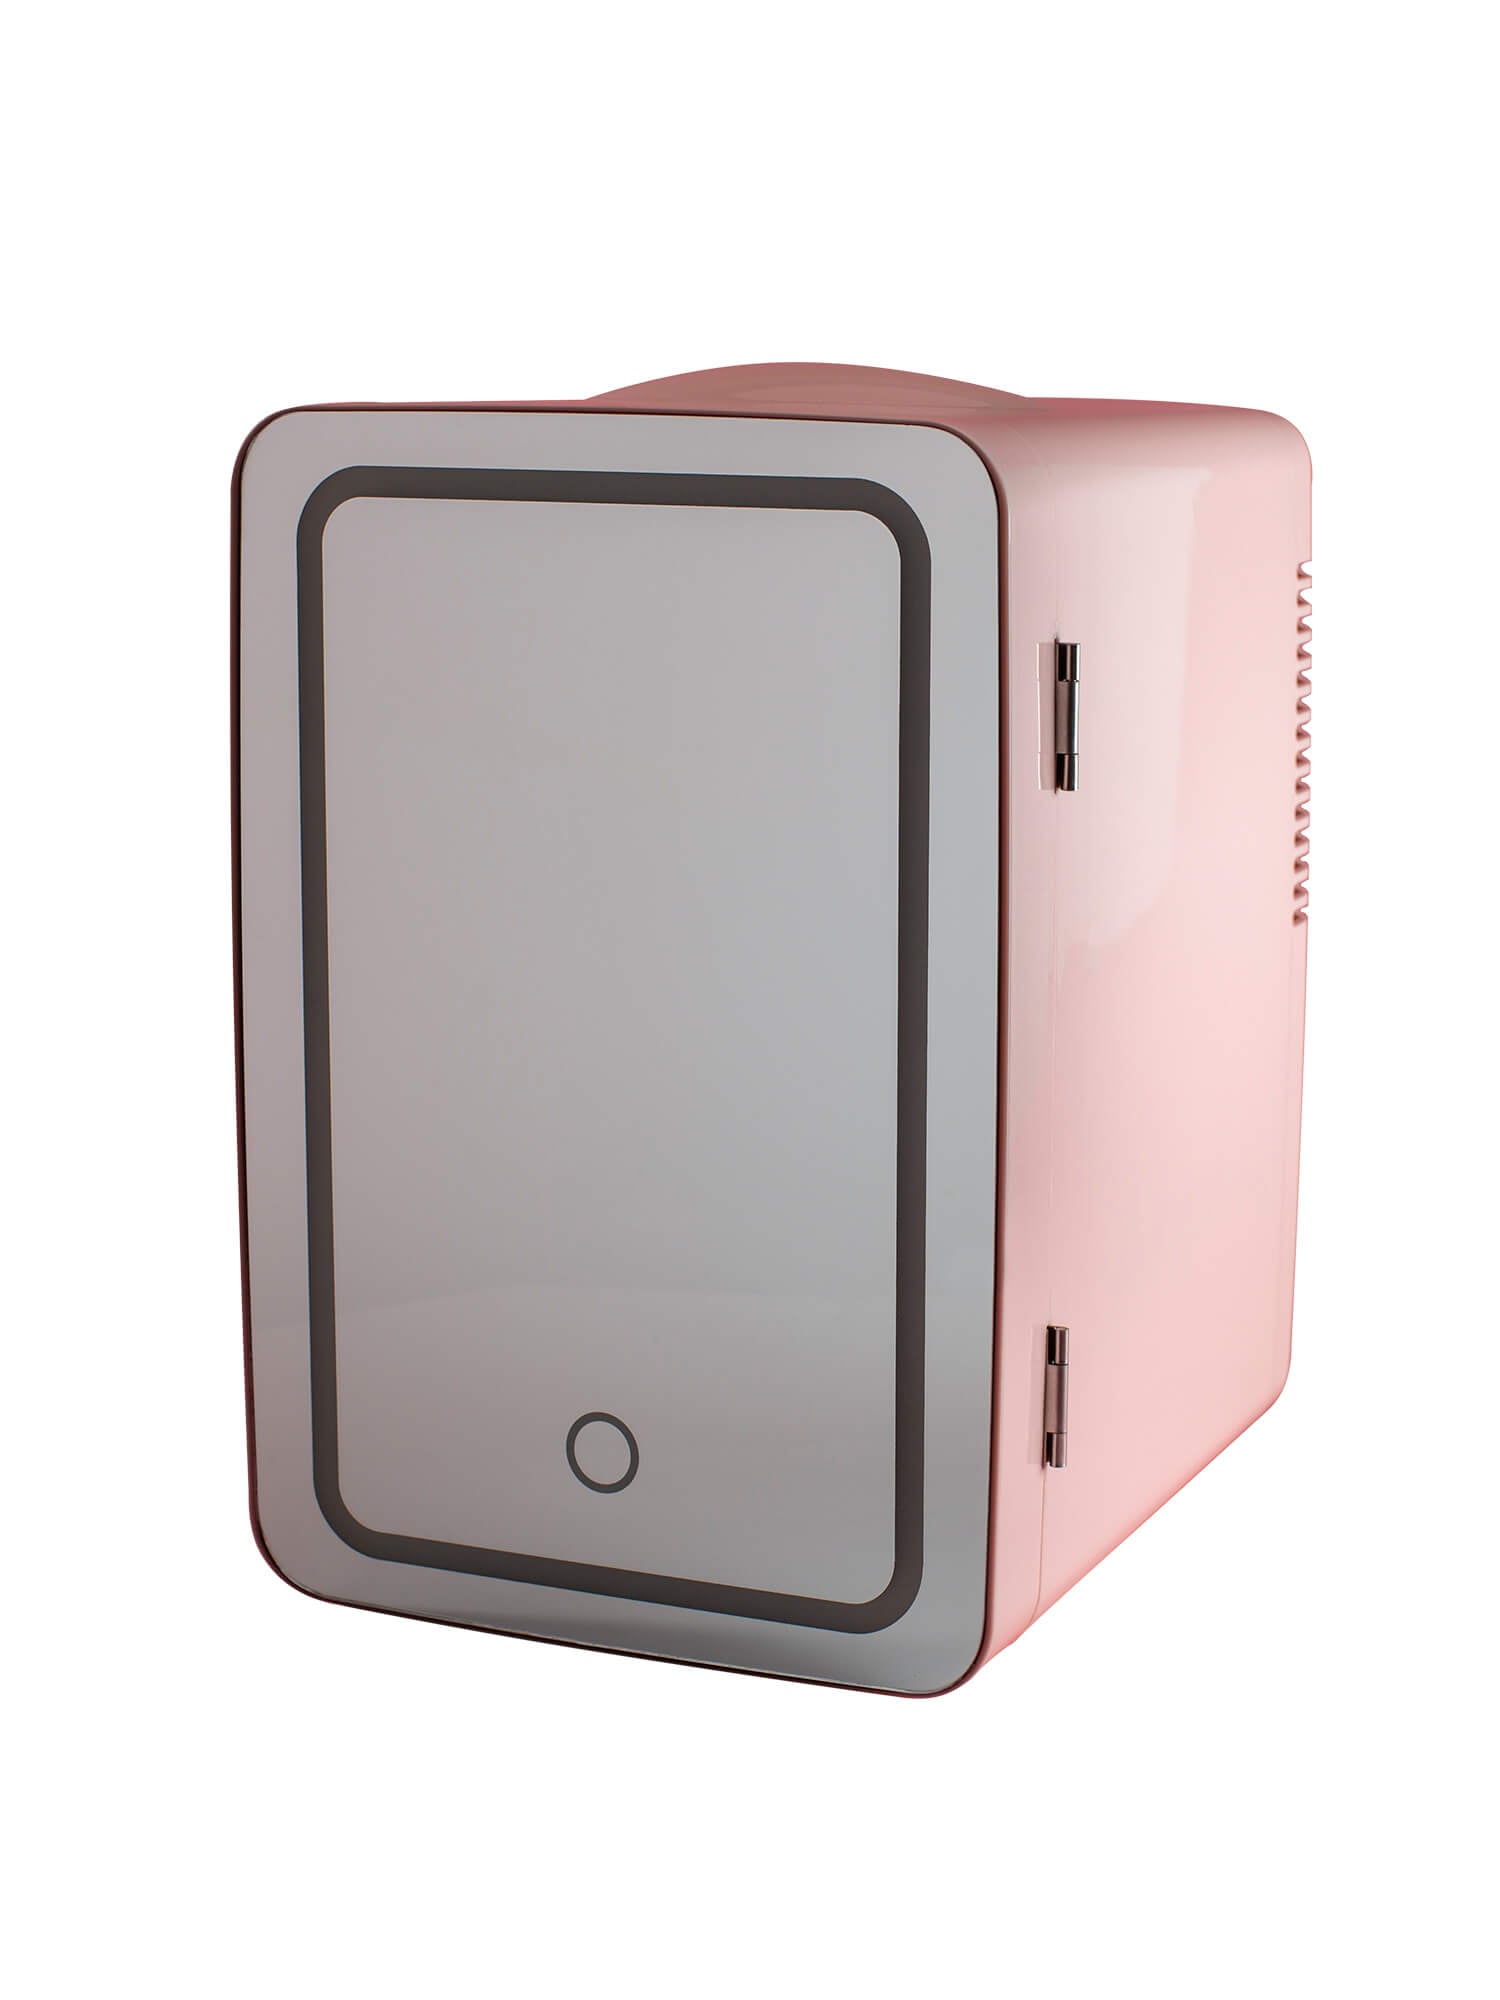 Mini Fridge - Hot or Cold - LED Lighted with Mirror Door - Pink